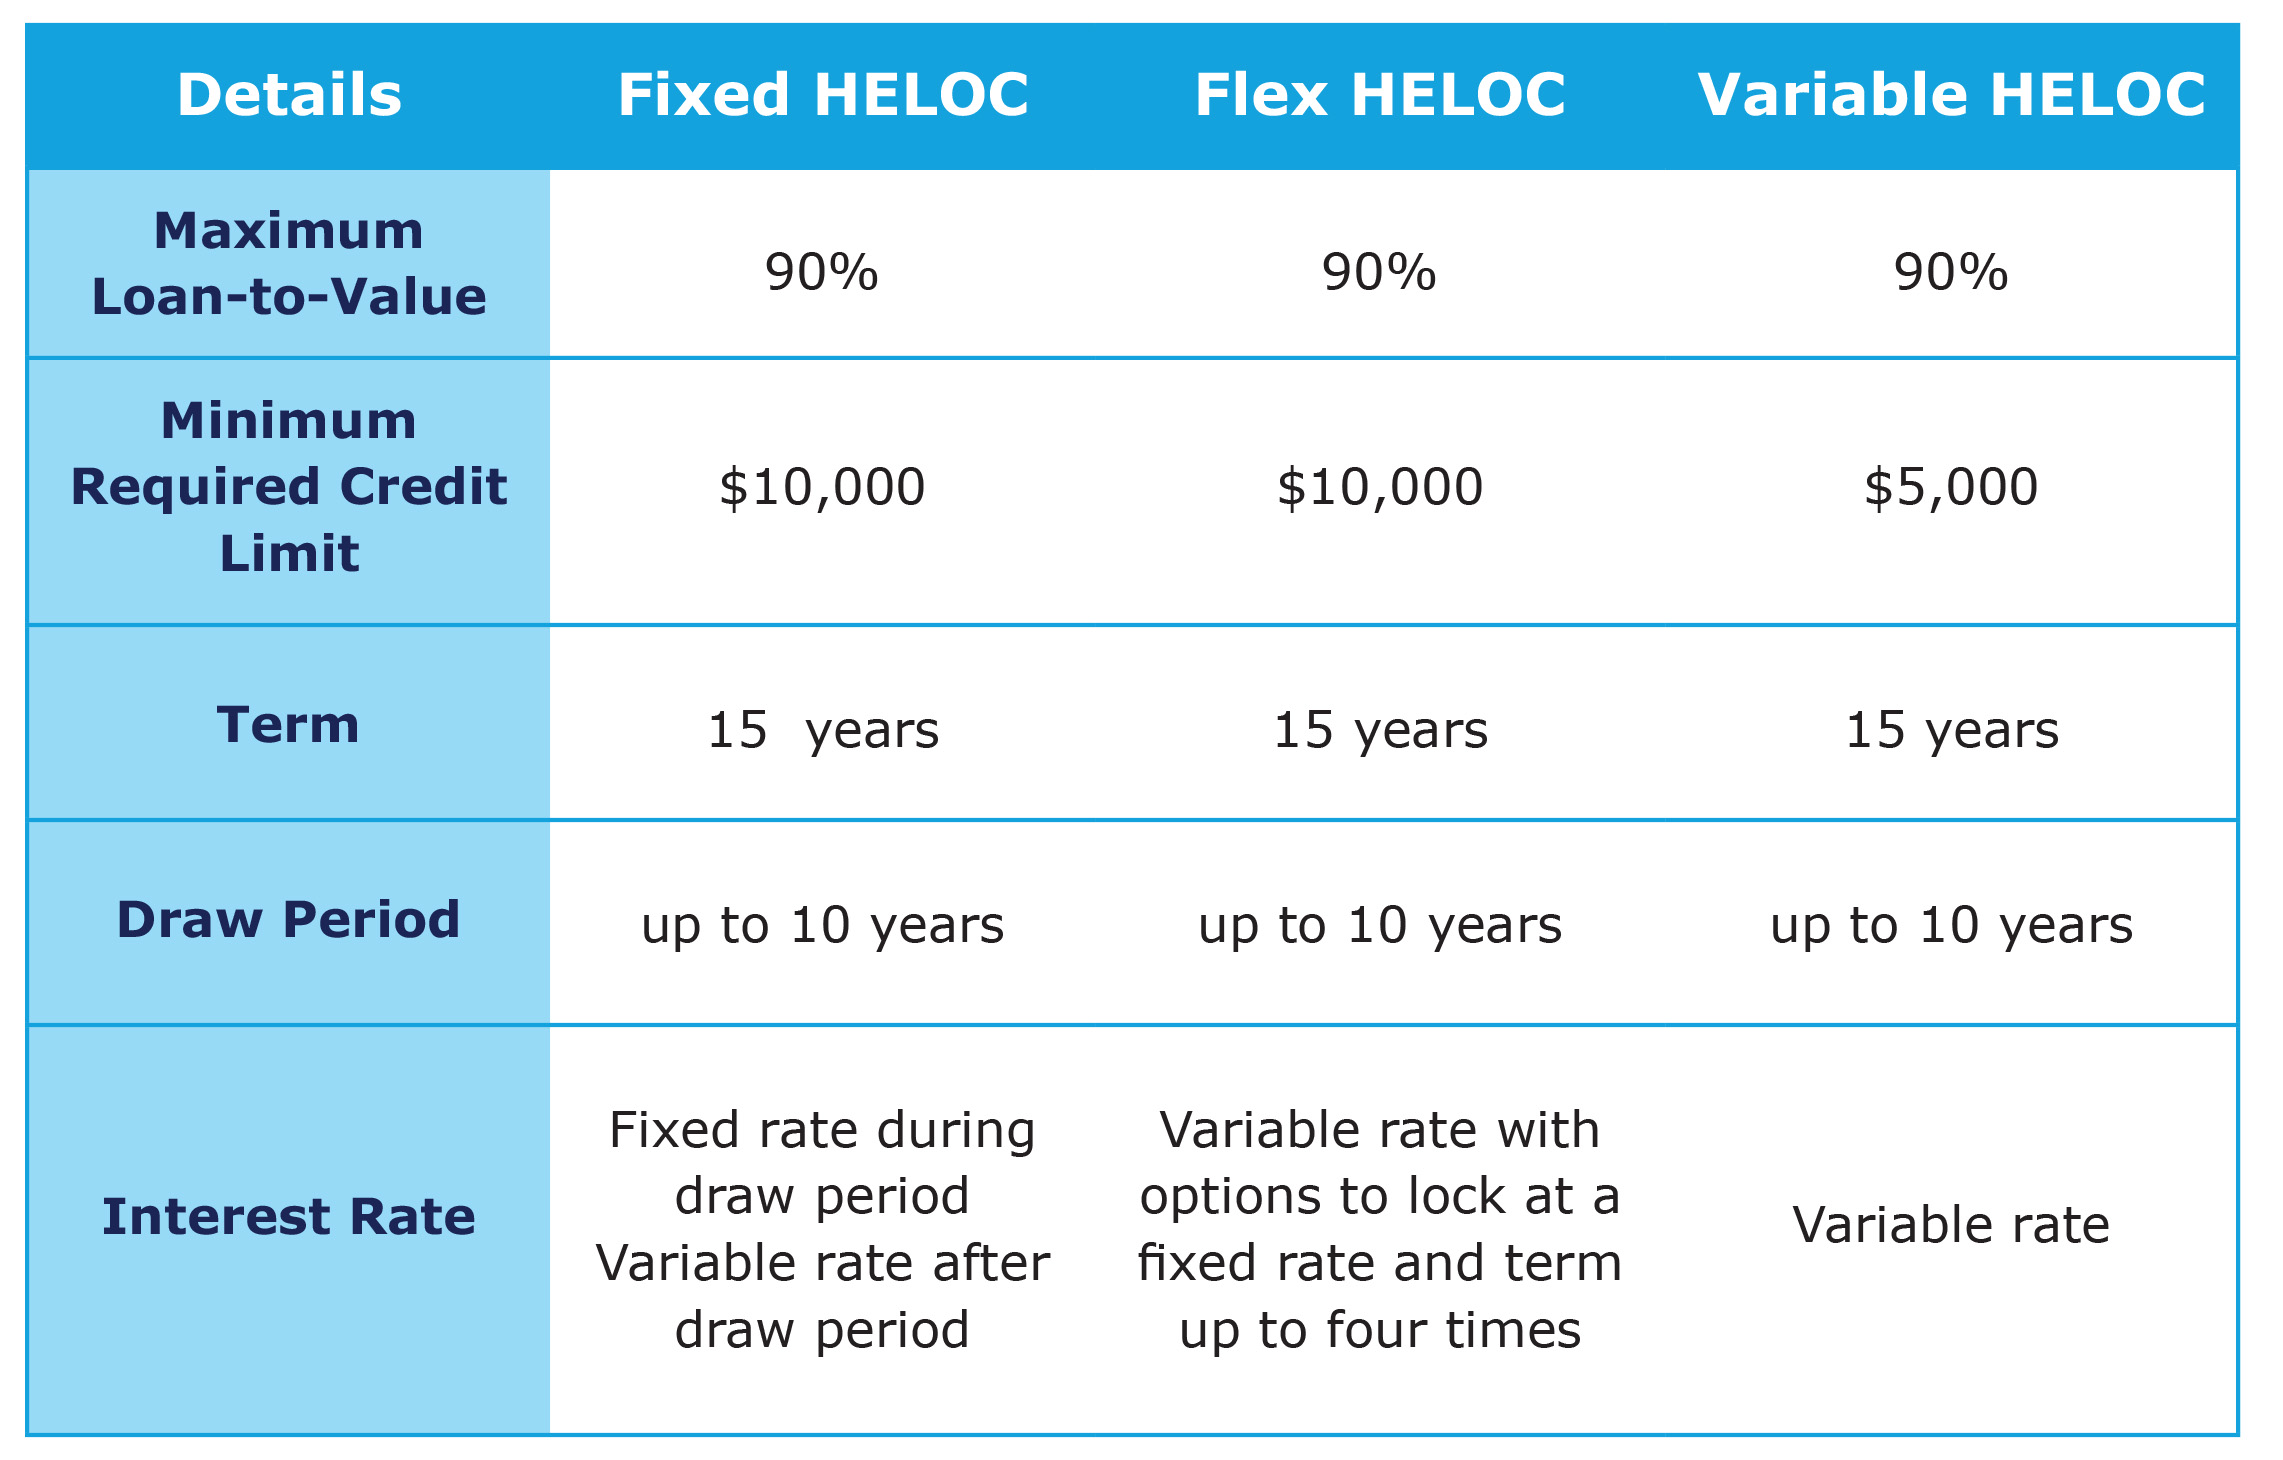 Fixed HELOC - Maximum Loan-to-Value: 90%, Minimum Required Credit Limit: $10,000, Term: 15 years, Draw Period: up to 10 years, Interest Rate: Fixed rate during draw period Variable rate after draw period. Flex HELOC - Maximum Loan-to-Value: 90%, Minimum Required Credit Limit: $10,000, Term: 15 years, Draw Period: up to 10 years, Interest Rate: Variable rate with options to lock at a fixed rate and term up to four times. Variable HELOC - Maximum Loan-to-Value: 90%, Minimum Required Credit Limit: $5,000, Term: 15 years, Draw Period: up to 10 years, Interest Rate: Variable rate